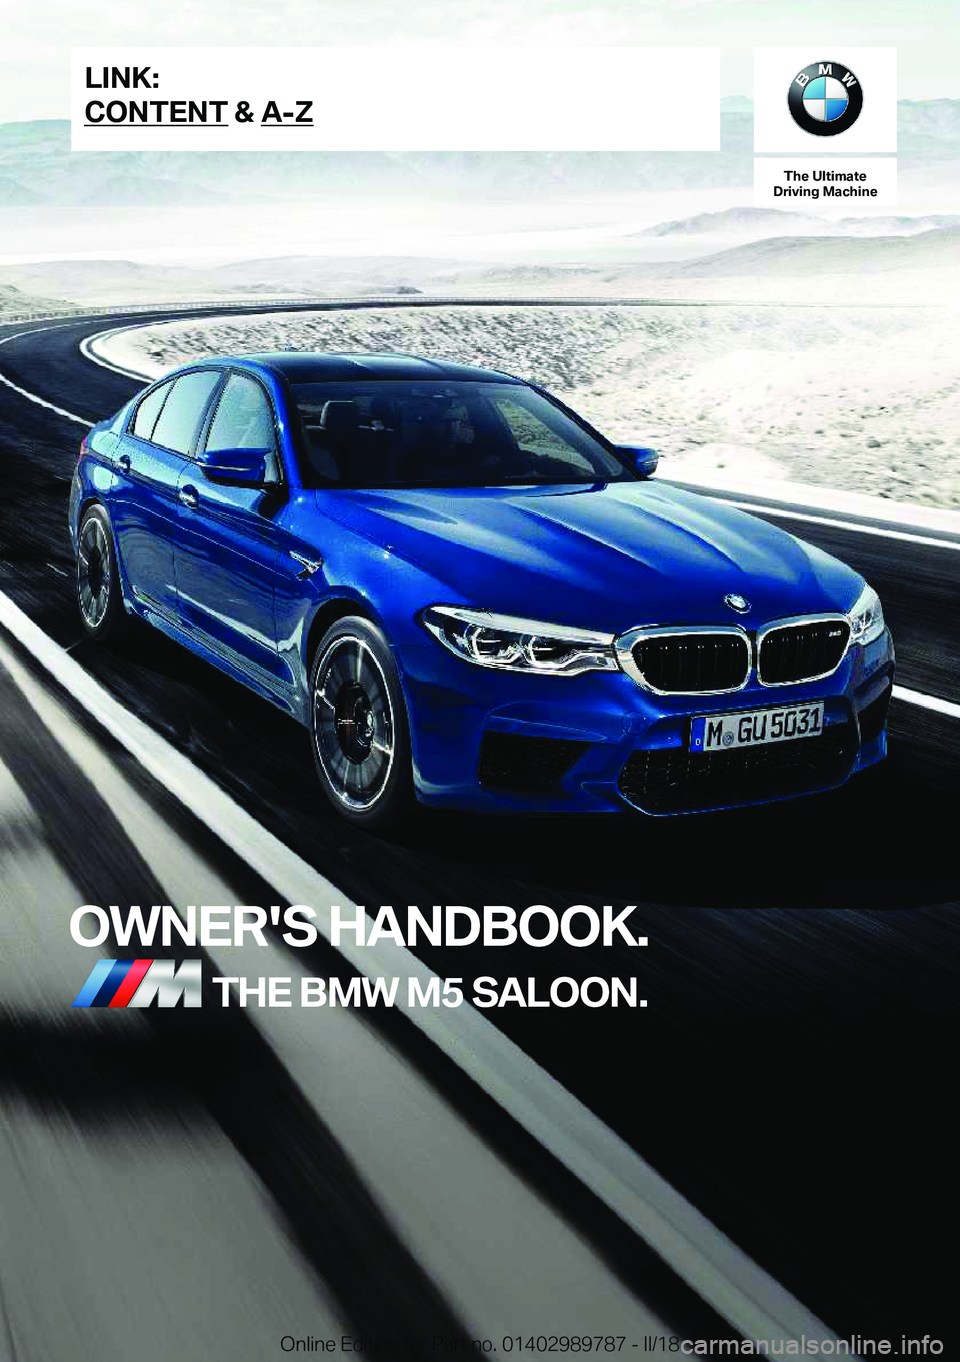 BMW M5 2018  Owners Manual �T�h�e��U�l�t�i�m�a�t�e
�D�r�i�v�i�n�g��M�a�c�h�i�n�e
�O�W�N�E�R�'�S��H�A�N�D�B�O�O�K�.�T�H�E��B�M�W��M�5��S�A�L�O�O�N�.�L�I�N�K�:
�C�O�N�T�E�N�T��&��A�-�Z�O�n�l�i�n�e��E�d�i�t�i�o�n��f�